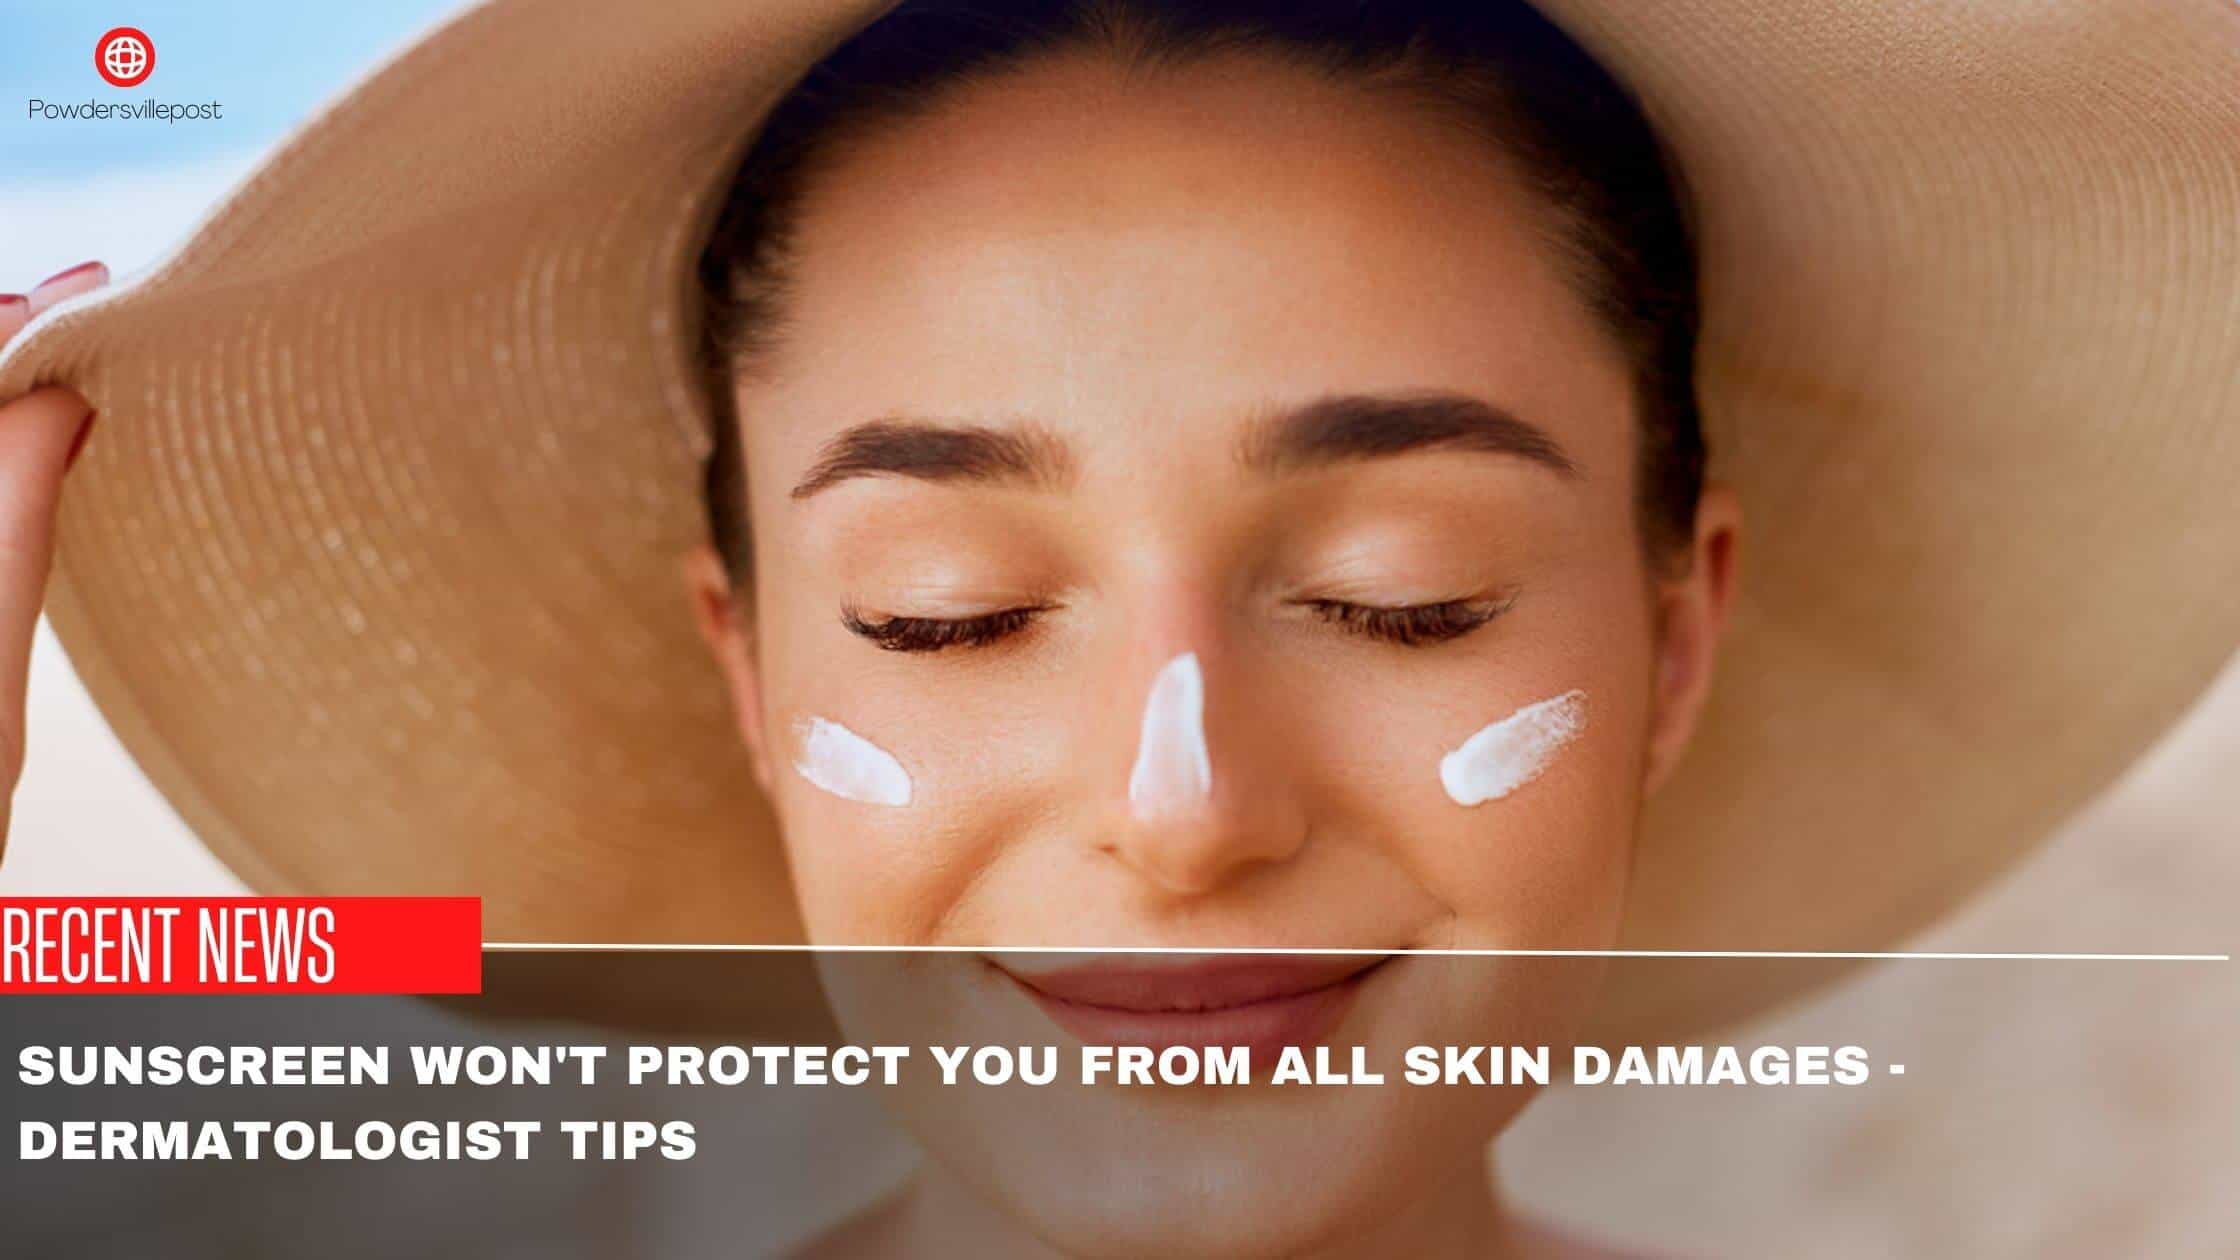 Sunscreen Won't Protect You From All Skin Damages -Dermatologist Tips